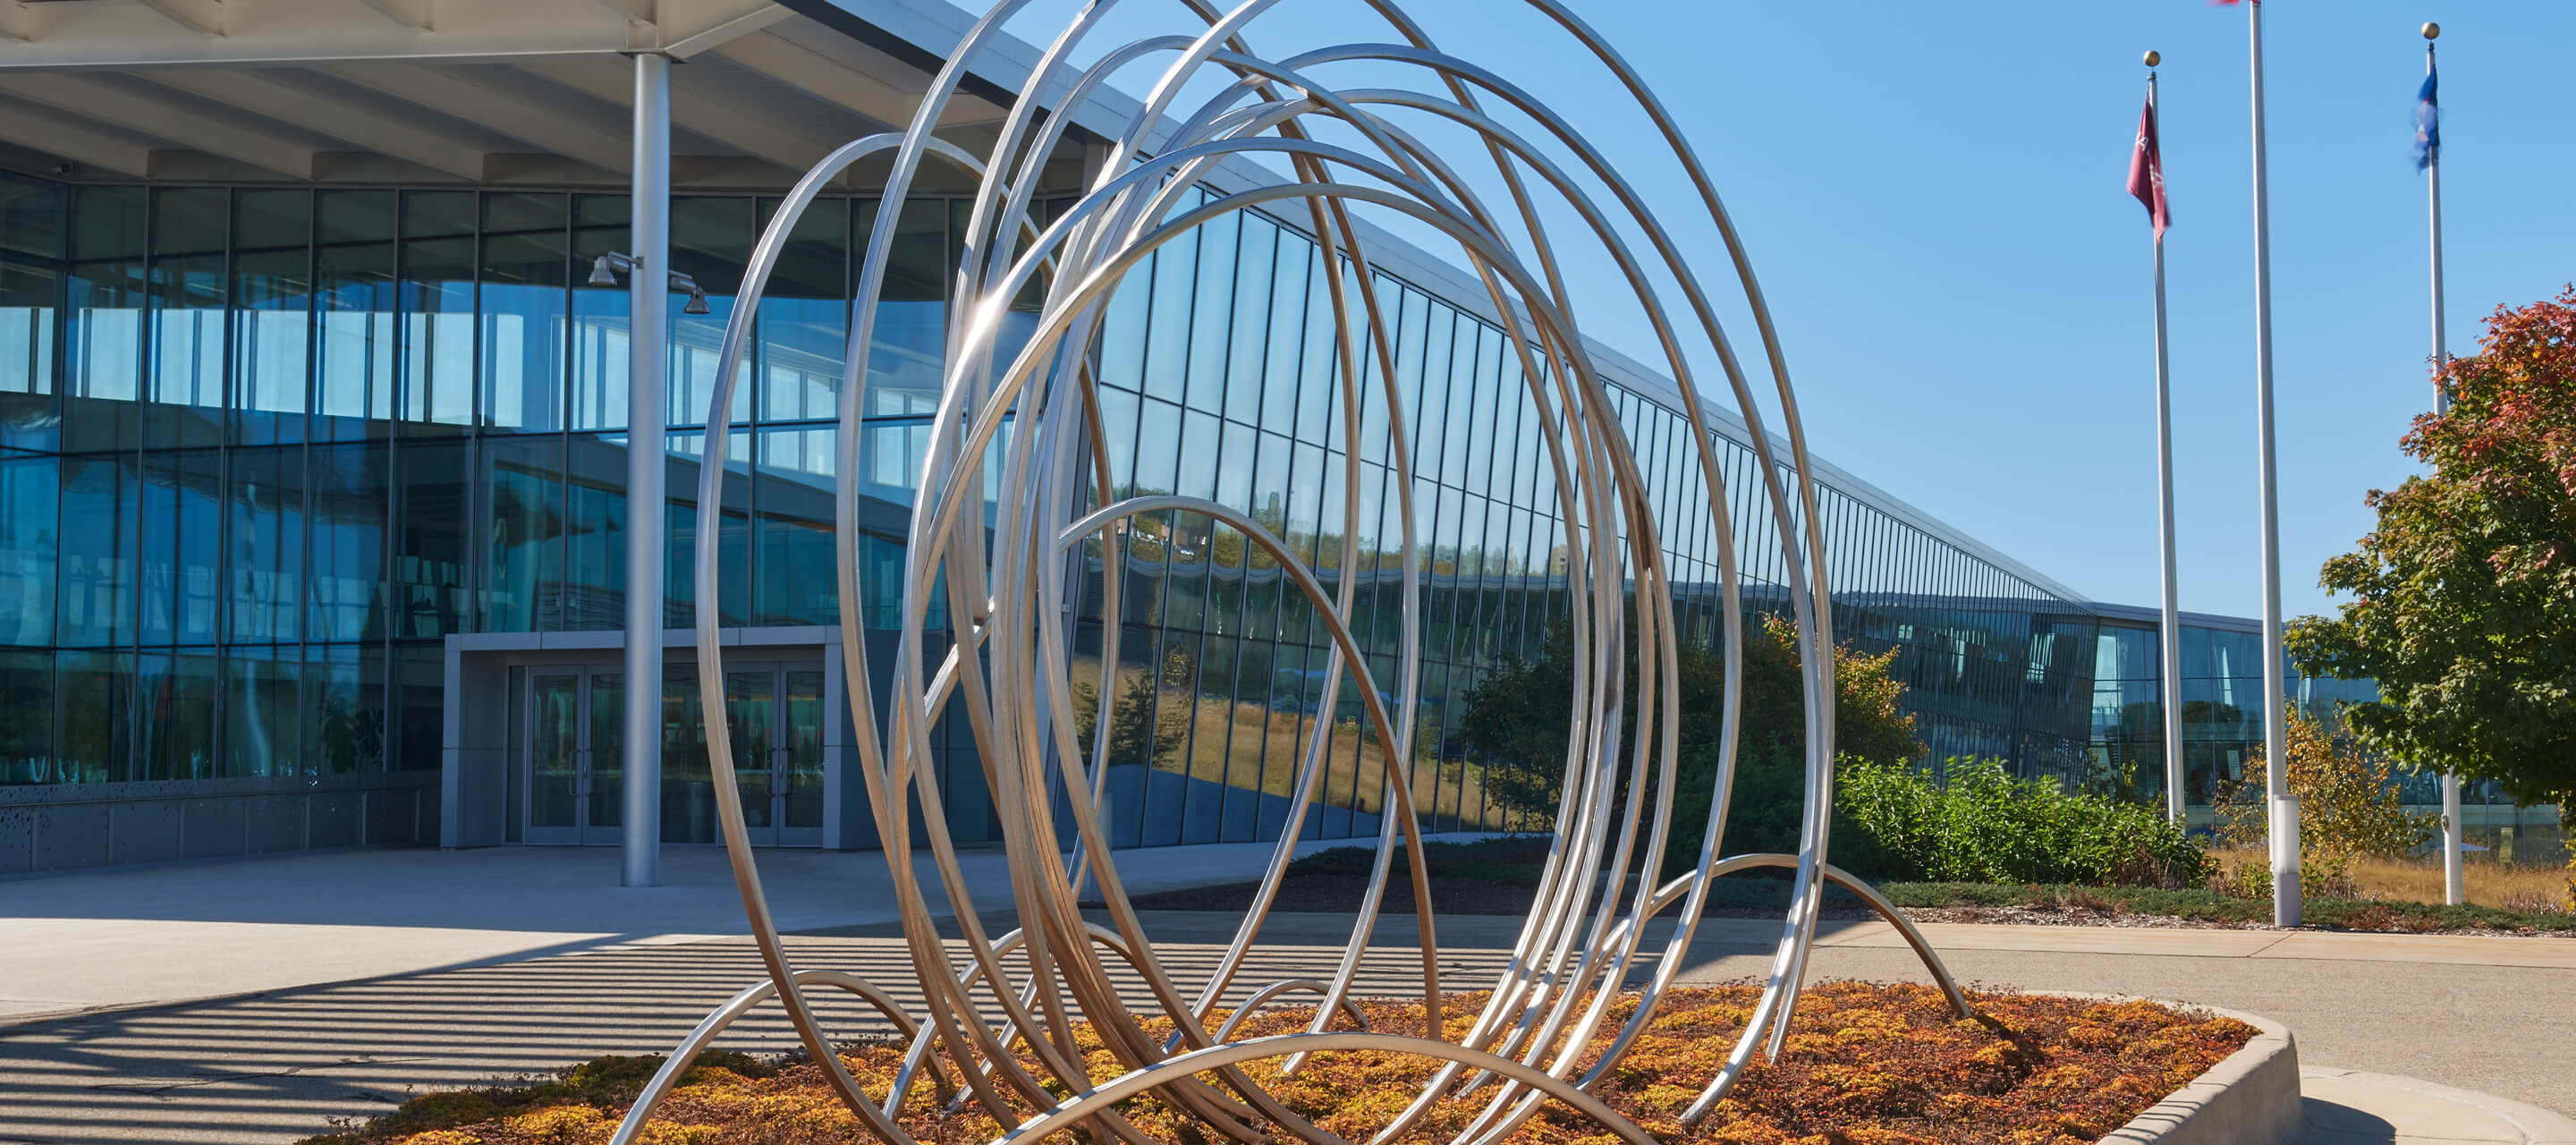 View outside of One Haworth Center with large metal circular sculpture.